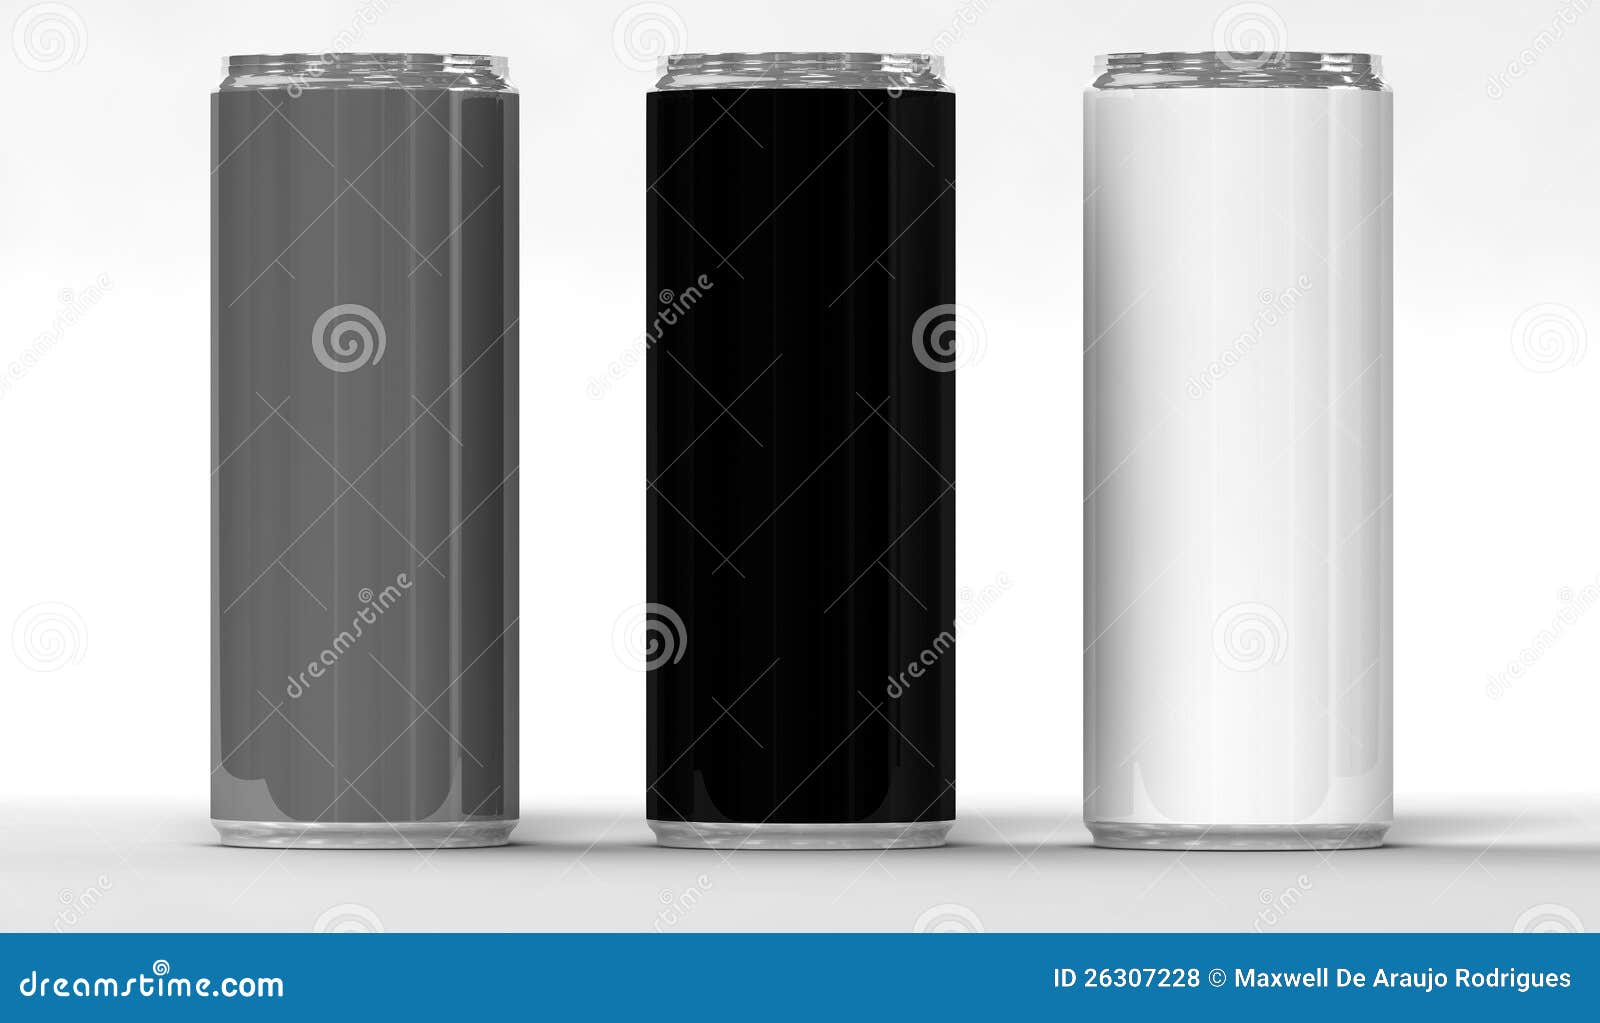 Energy Drink Cans Royalty Free Stock Photos - Image: 26307228